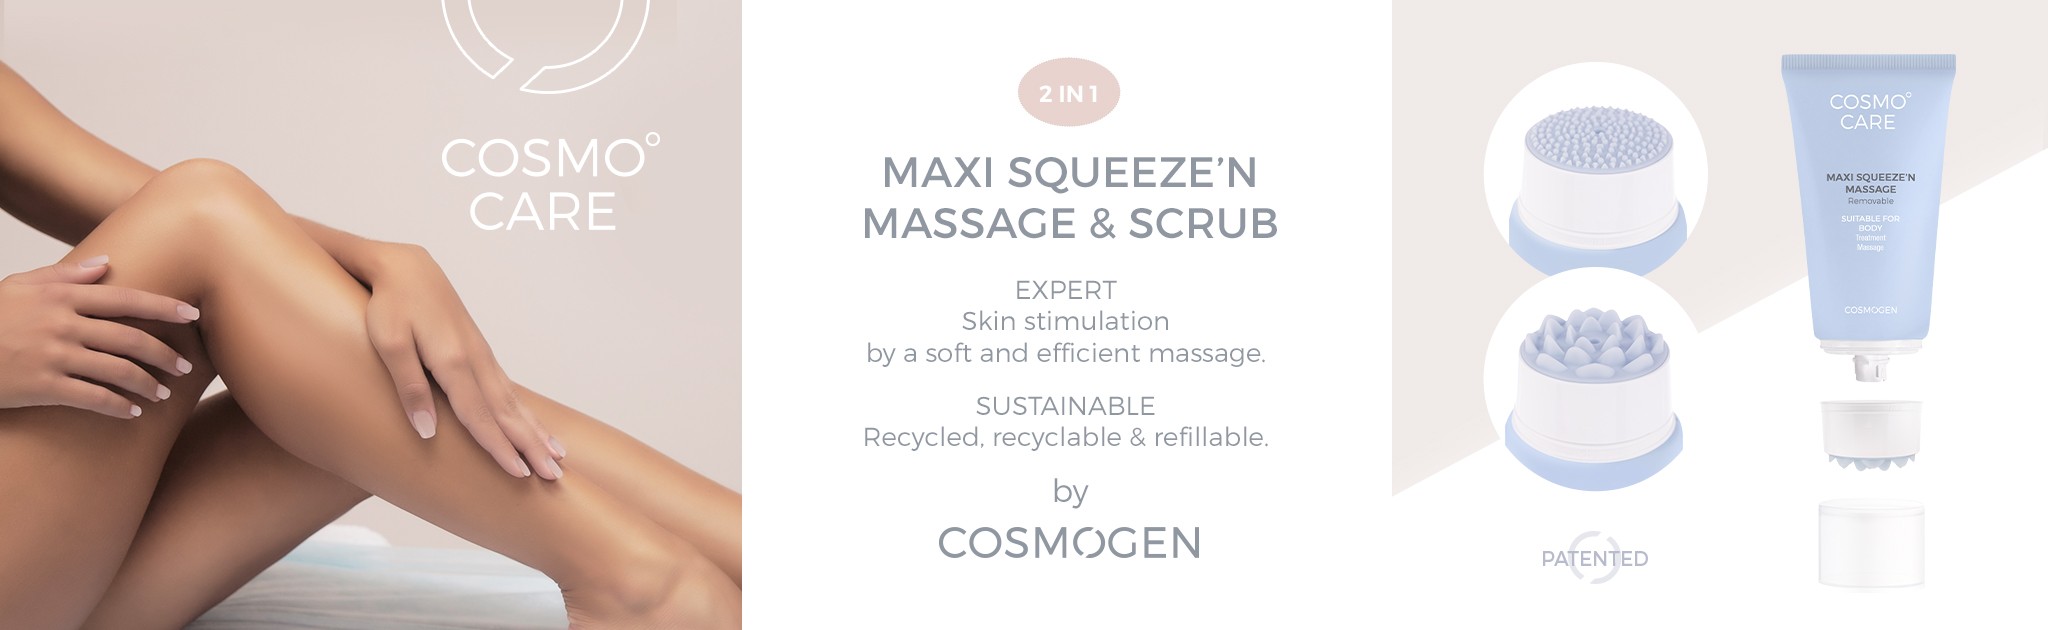 https://www.cosmogen.fr/maxi-squeeze-n-massage-removable.html?search_query=maxi&results=12